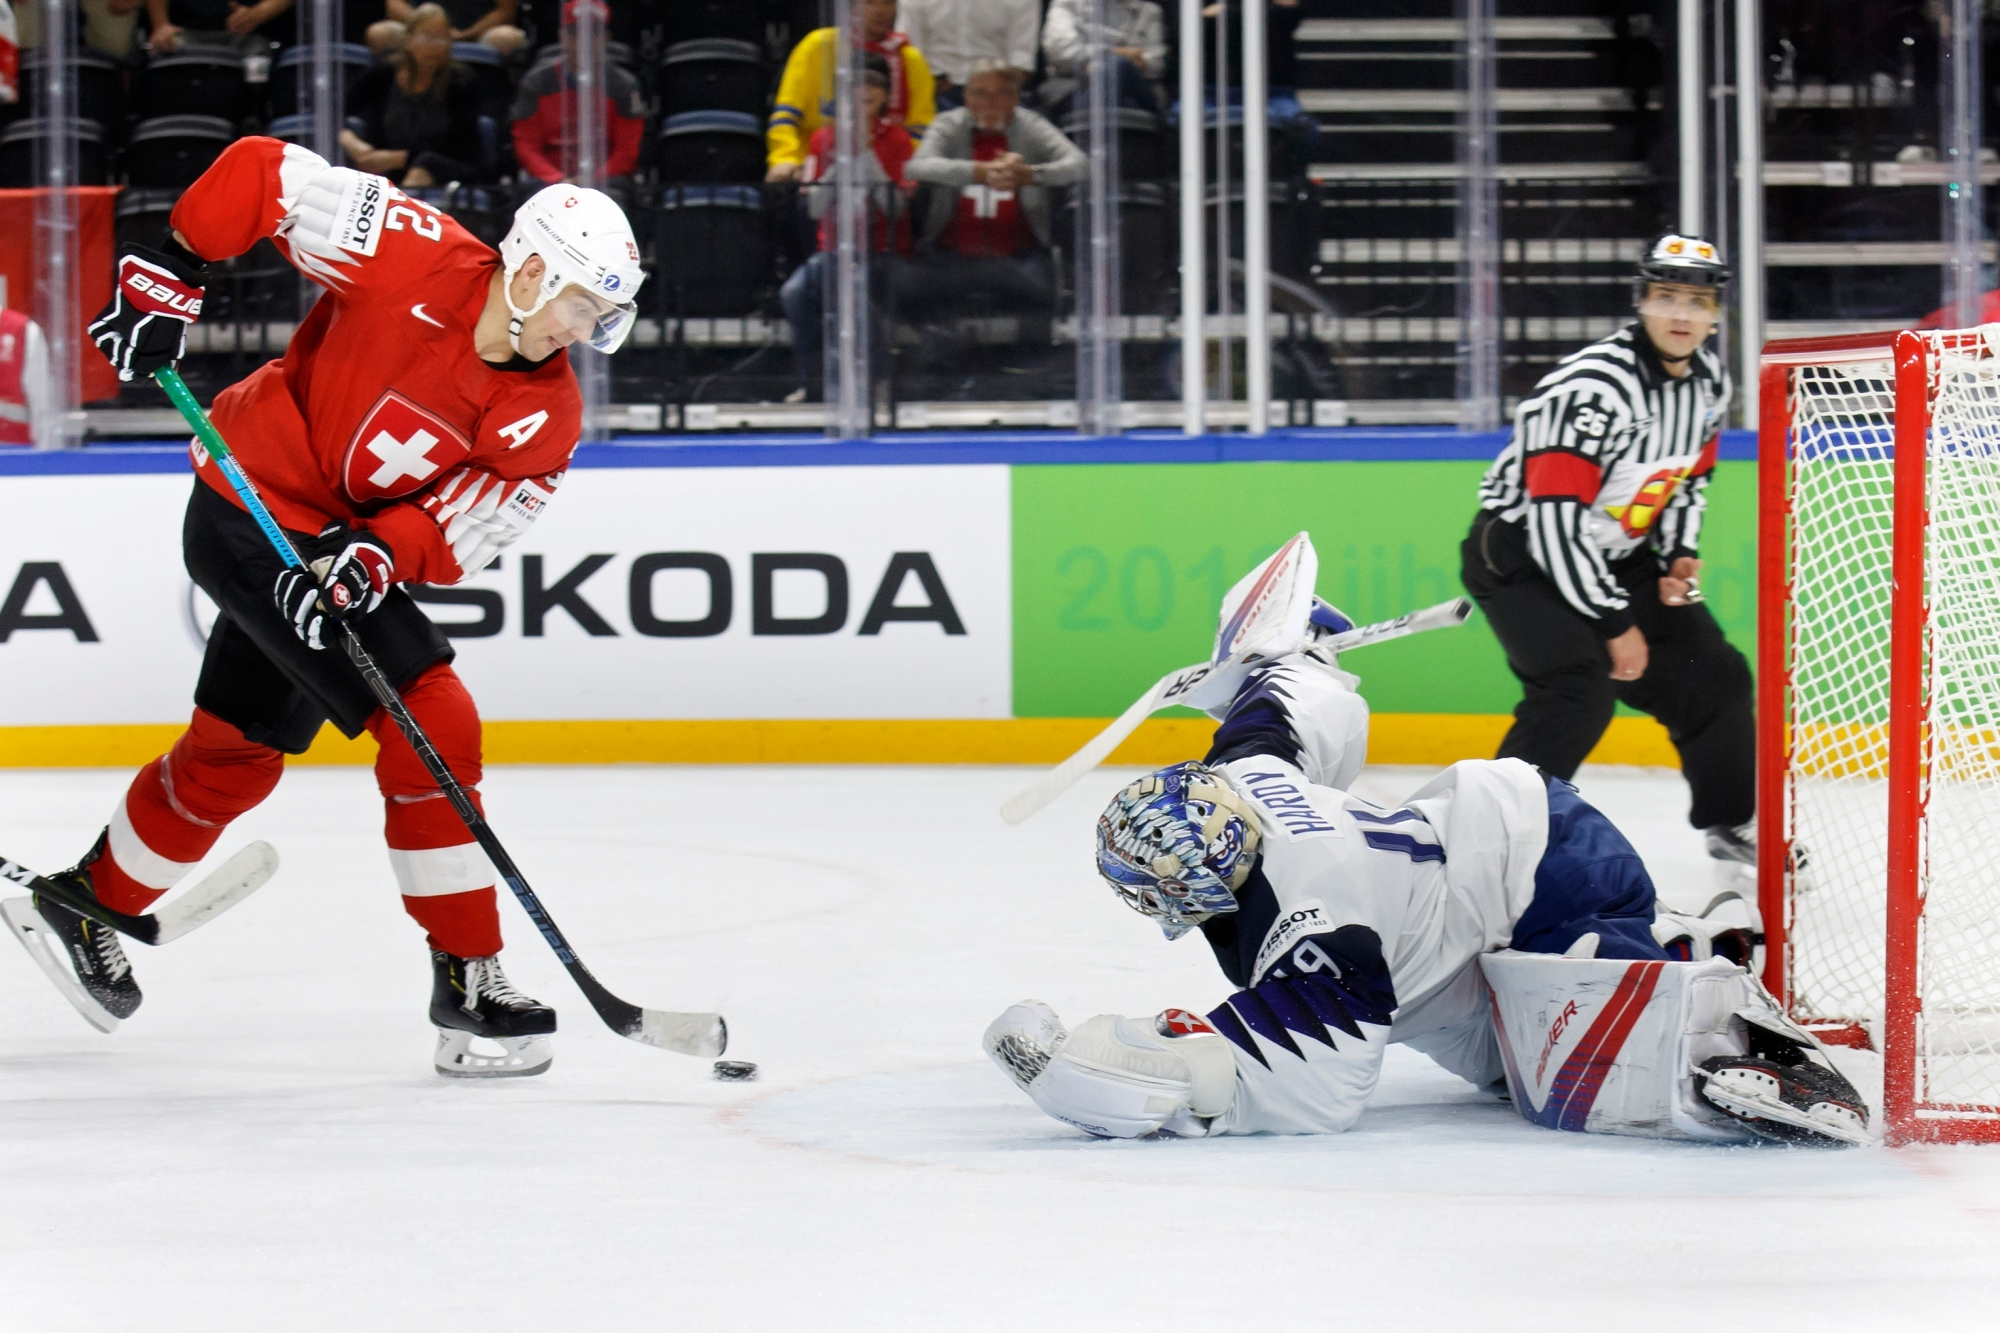 Switzerland's forward Nino Niederreiter, left, confronts to France's goaltender Florian Hardy, right, during the IIHF 2018 World Championship preliminary round game between Switzerland and France, at the Royal Arena, in Copenhagen, Denmark, Tuesday, May 15, 2018. (KEYSTONE/Salvatore Di Nolfi) DENMARK ICE HOCKEY IIHF WC 2018 SWITZERLAND FRANCE